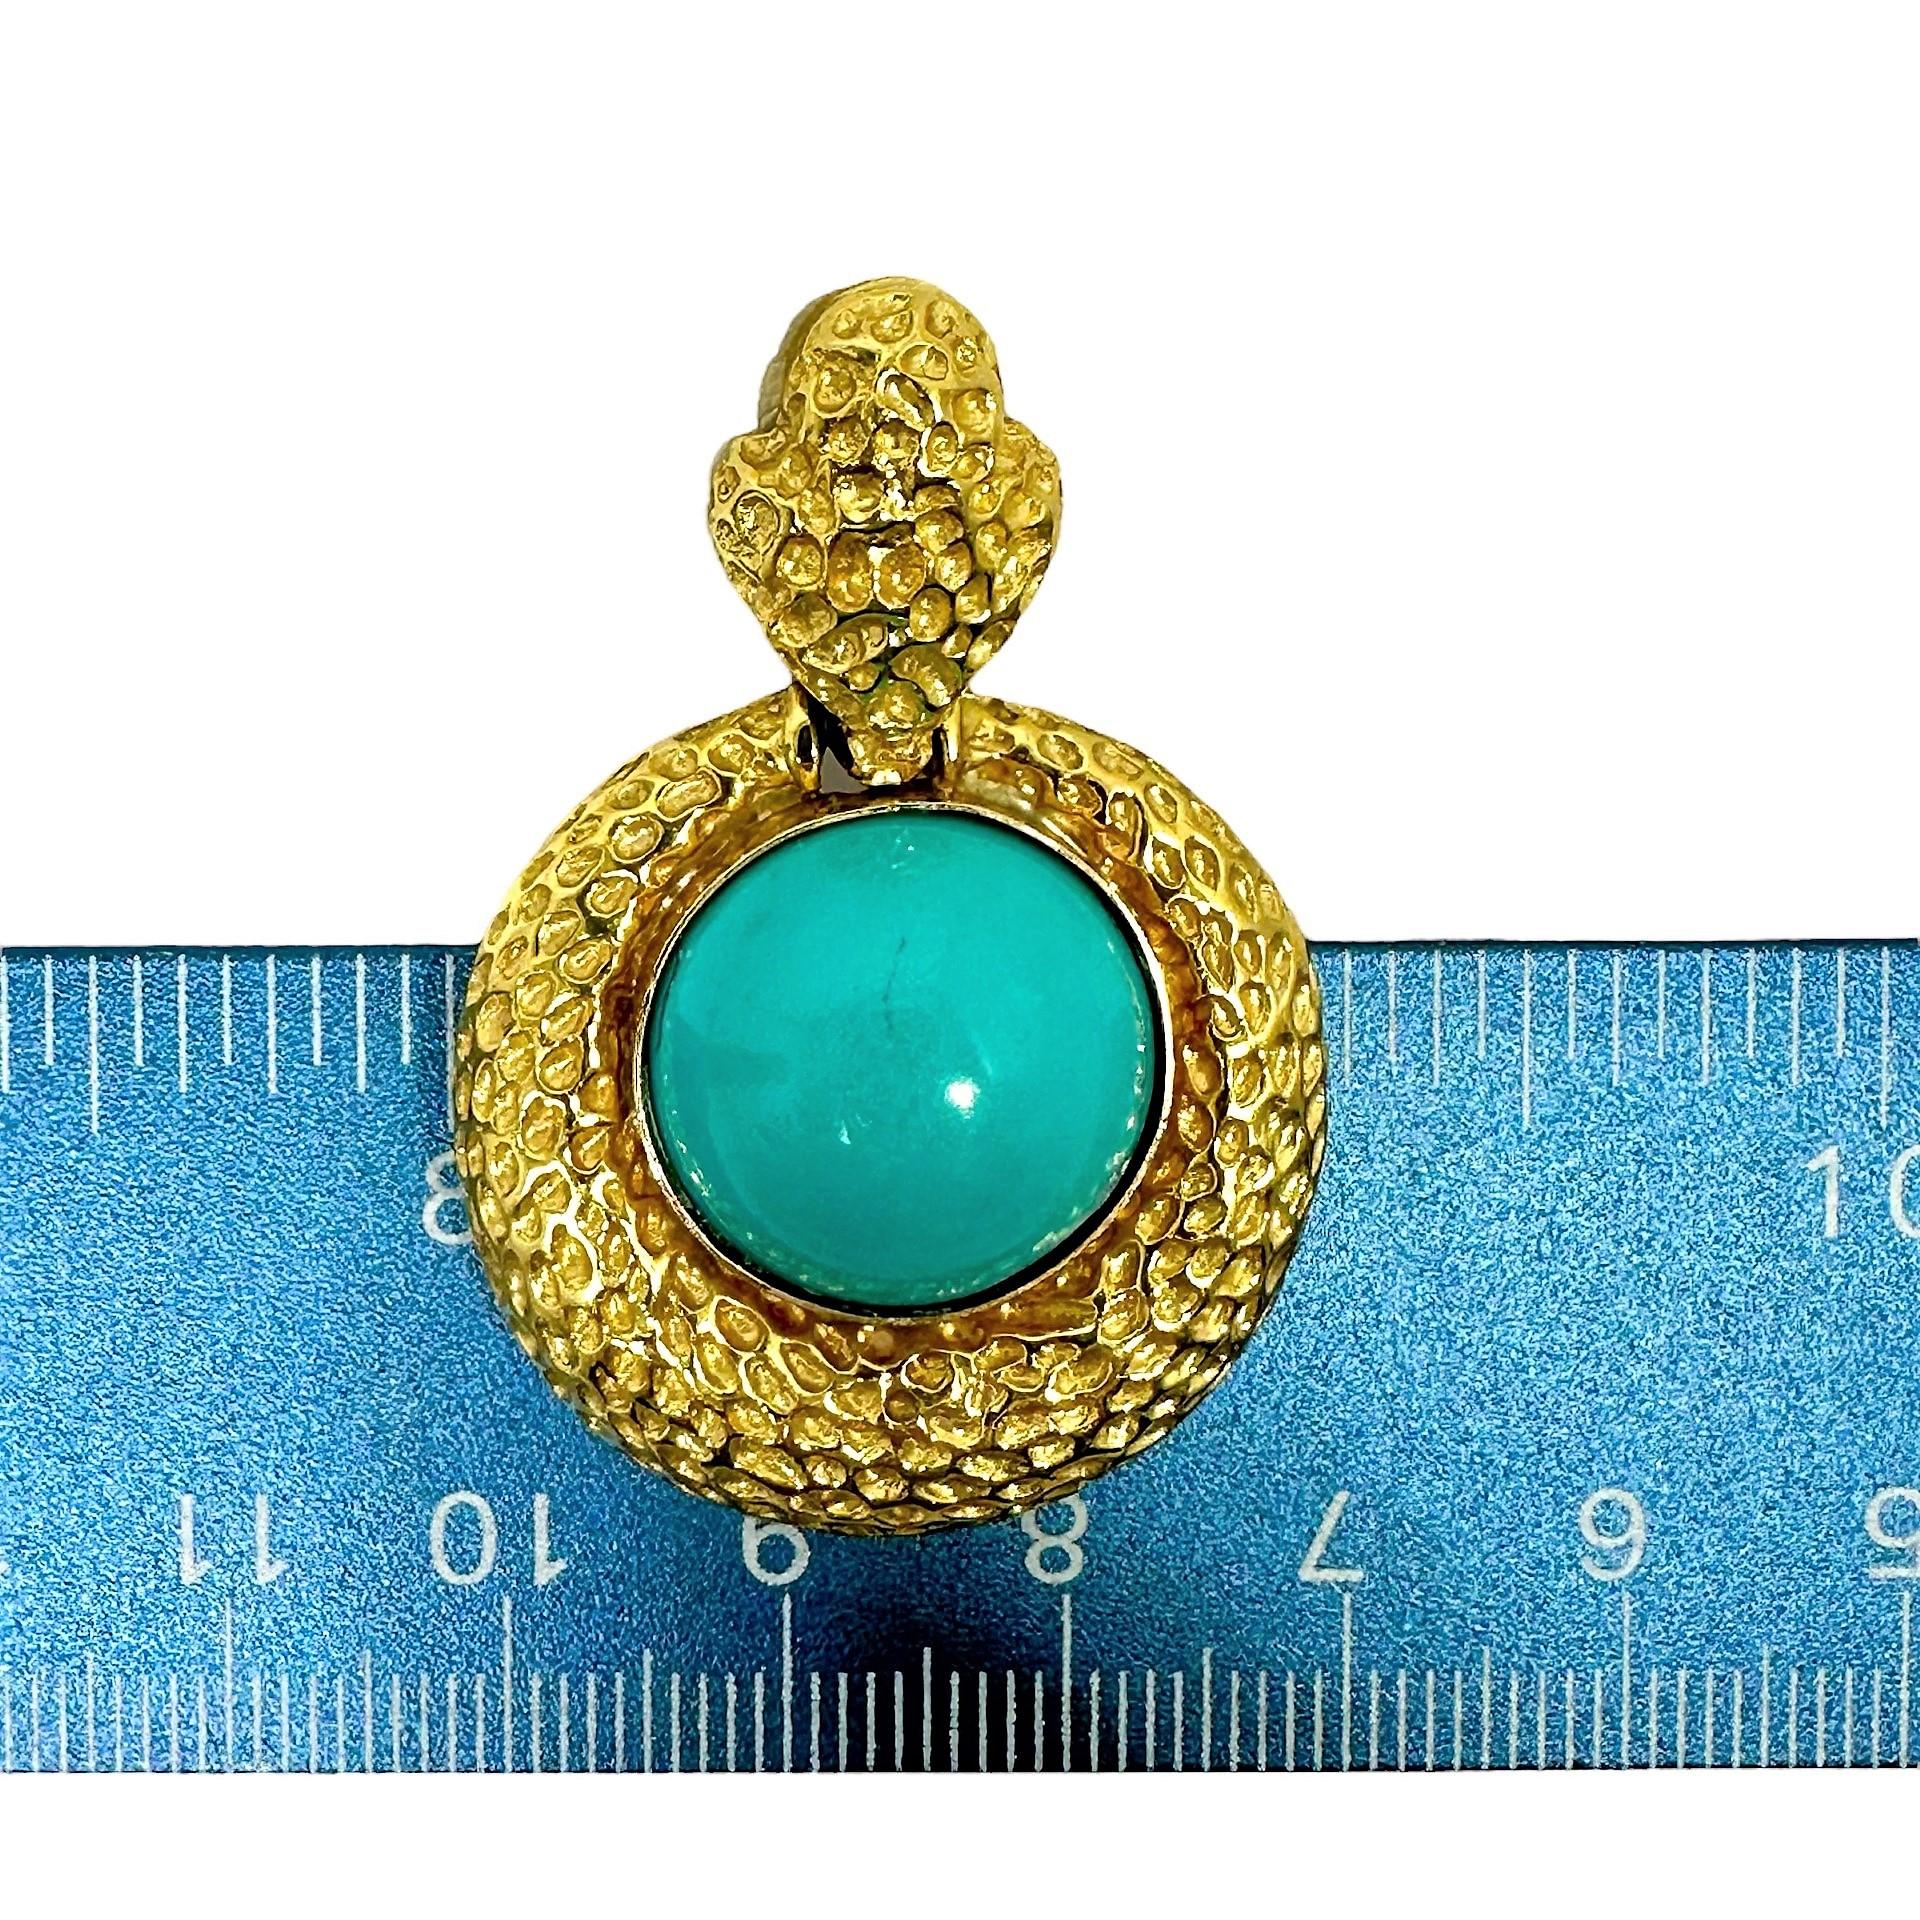 Women's Spritzer & Fuhrmann Vintage Gold Door Knocker Earrings with Persian Turquoise For Sale